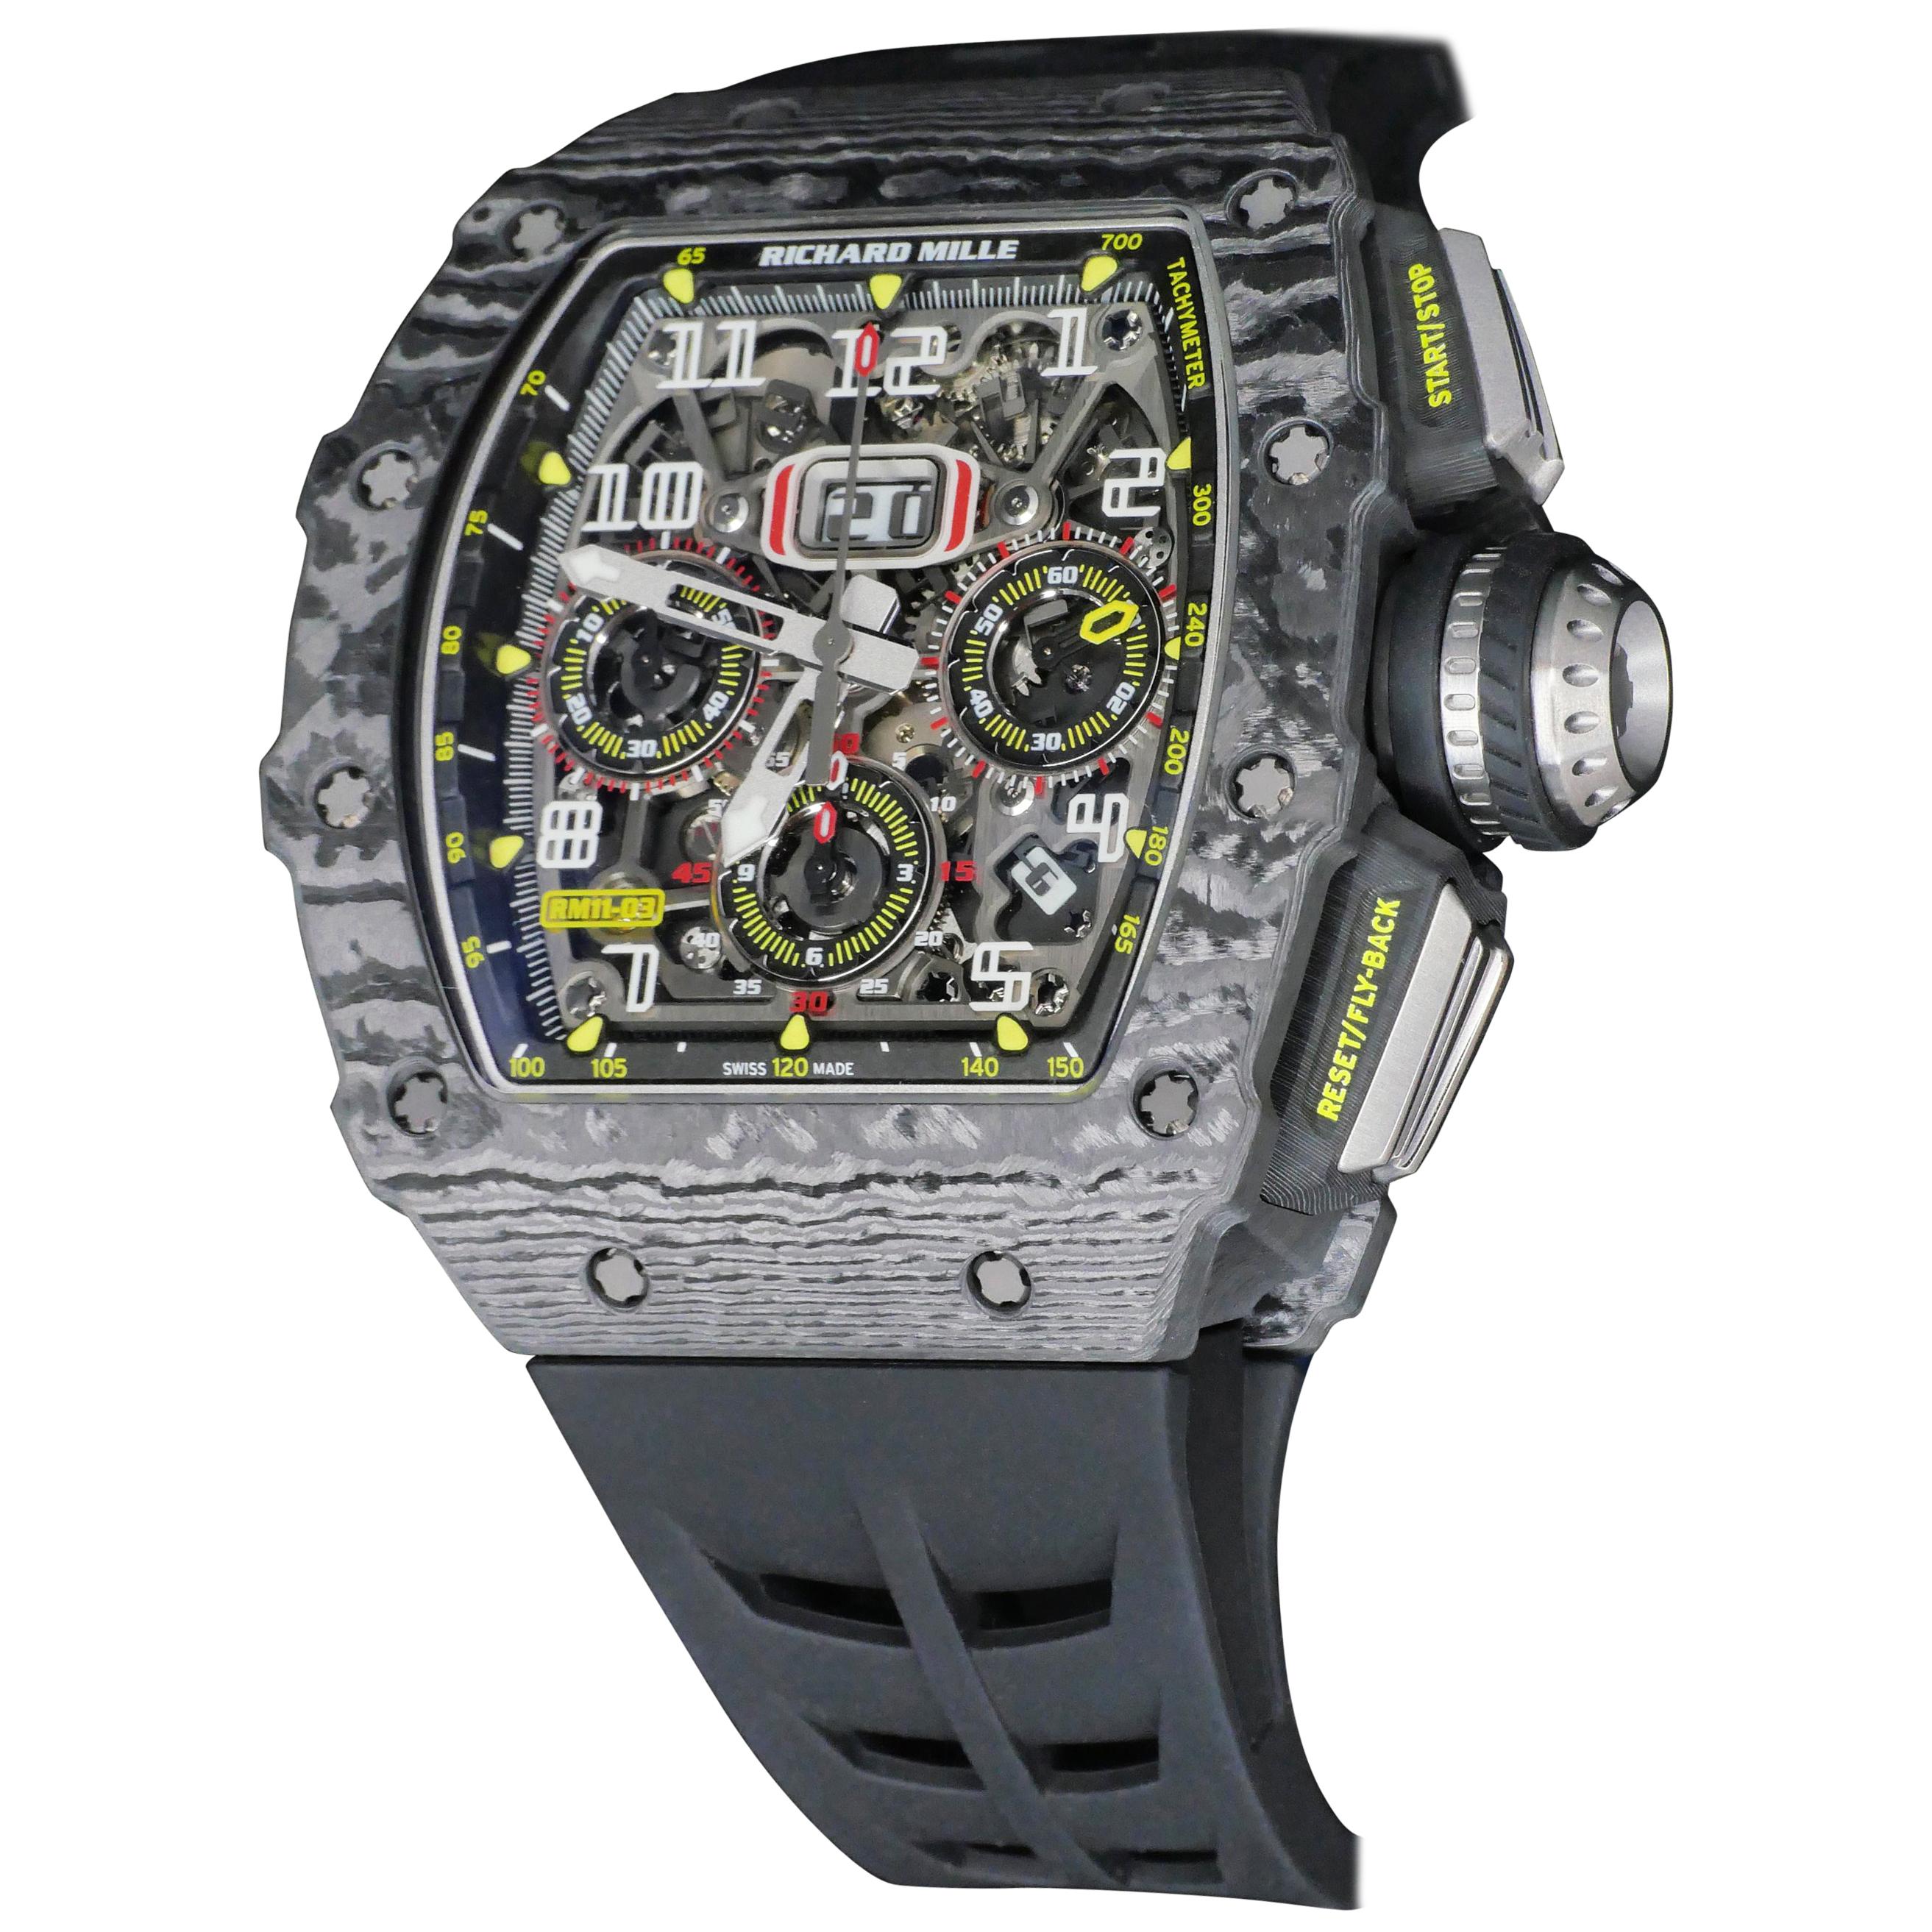 Richard Mille RM 011-03 Flyback Chronograph Automatic Wristwatch For Sale